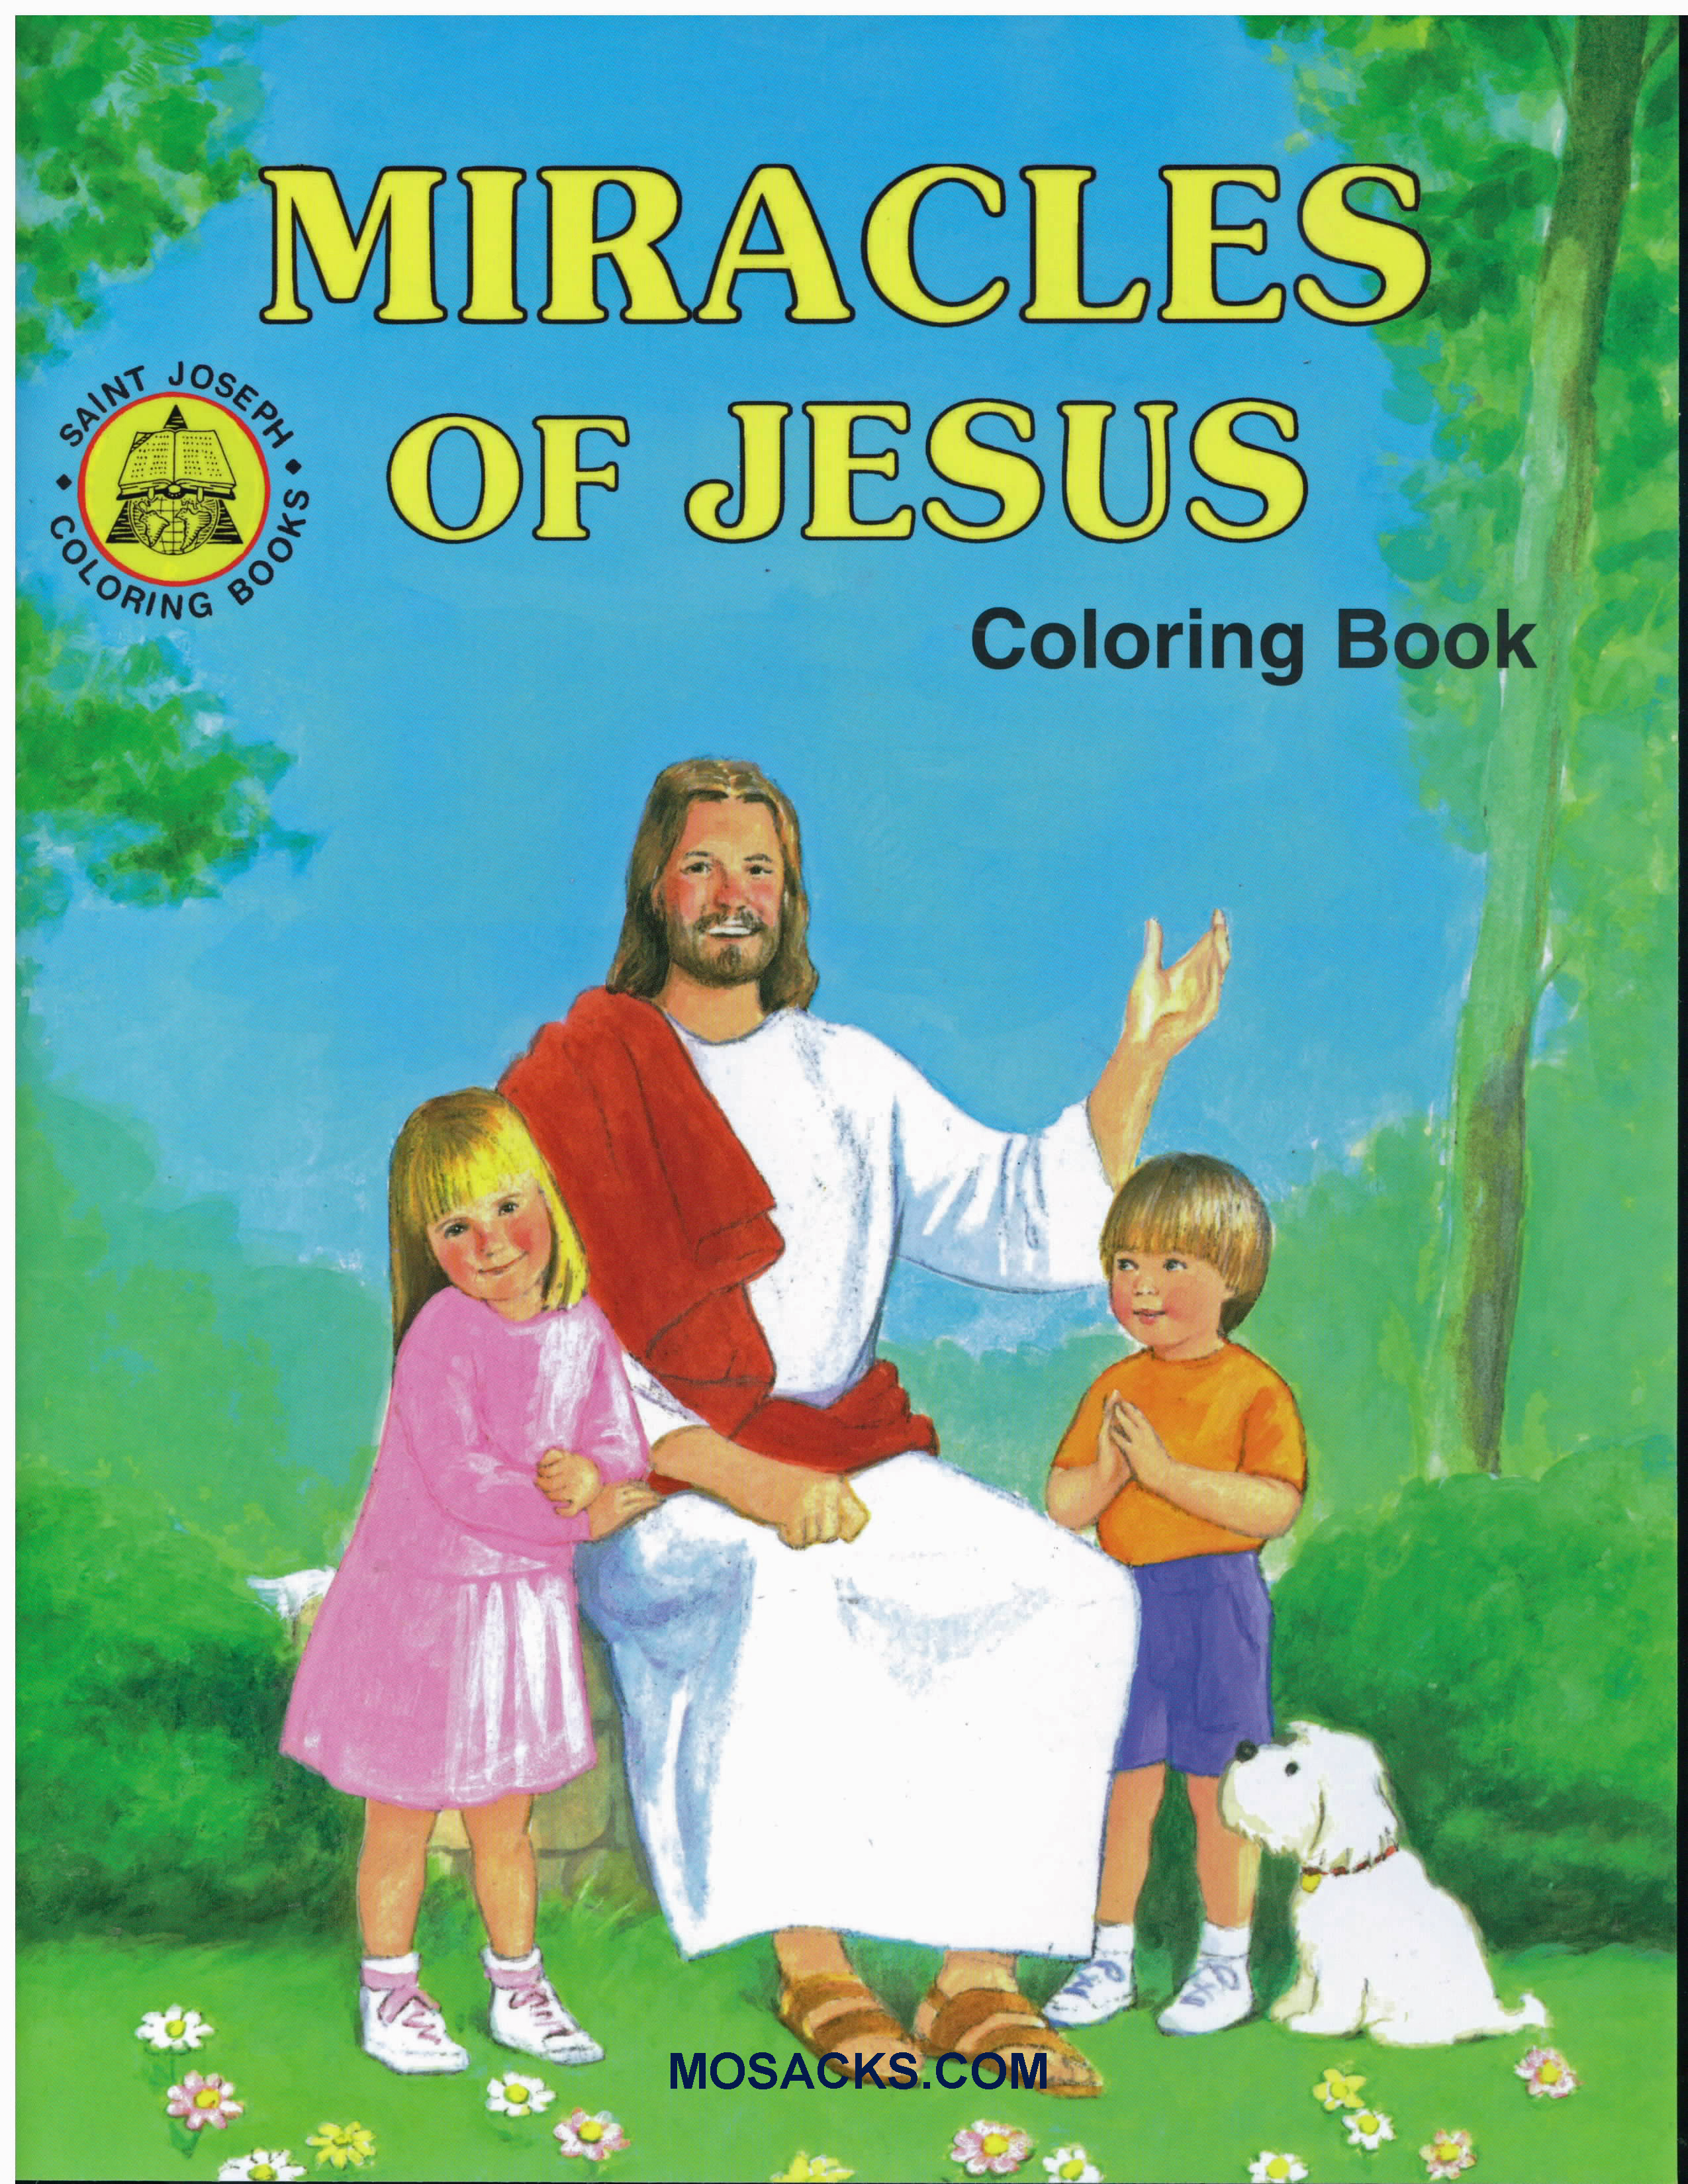 St Joseph 32 page Coloring Book Miracles Of Jesus-686